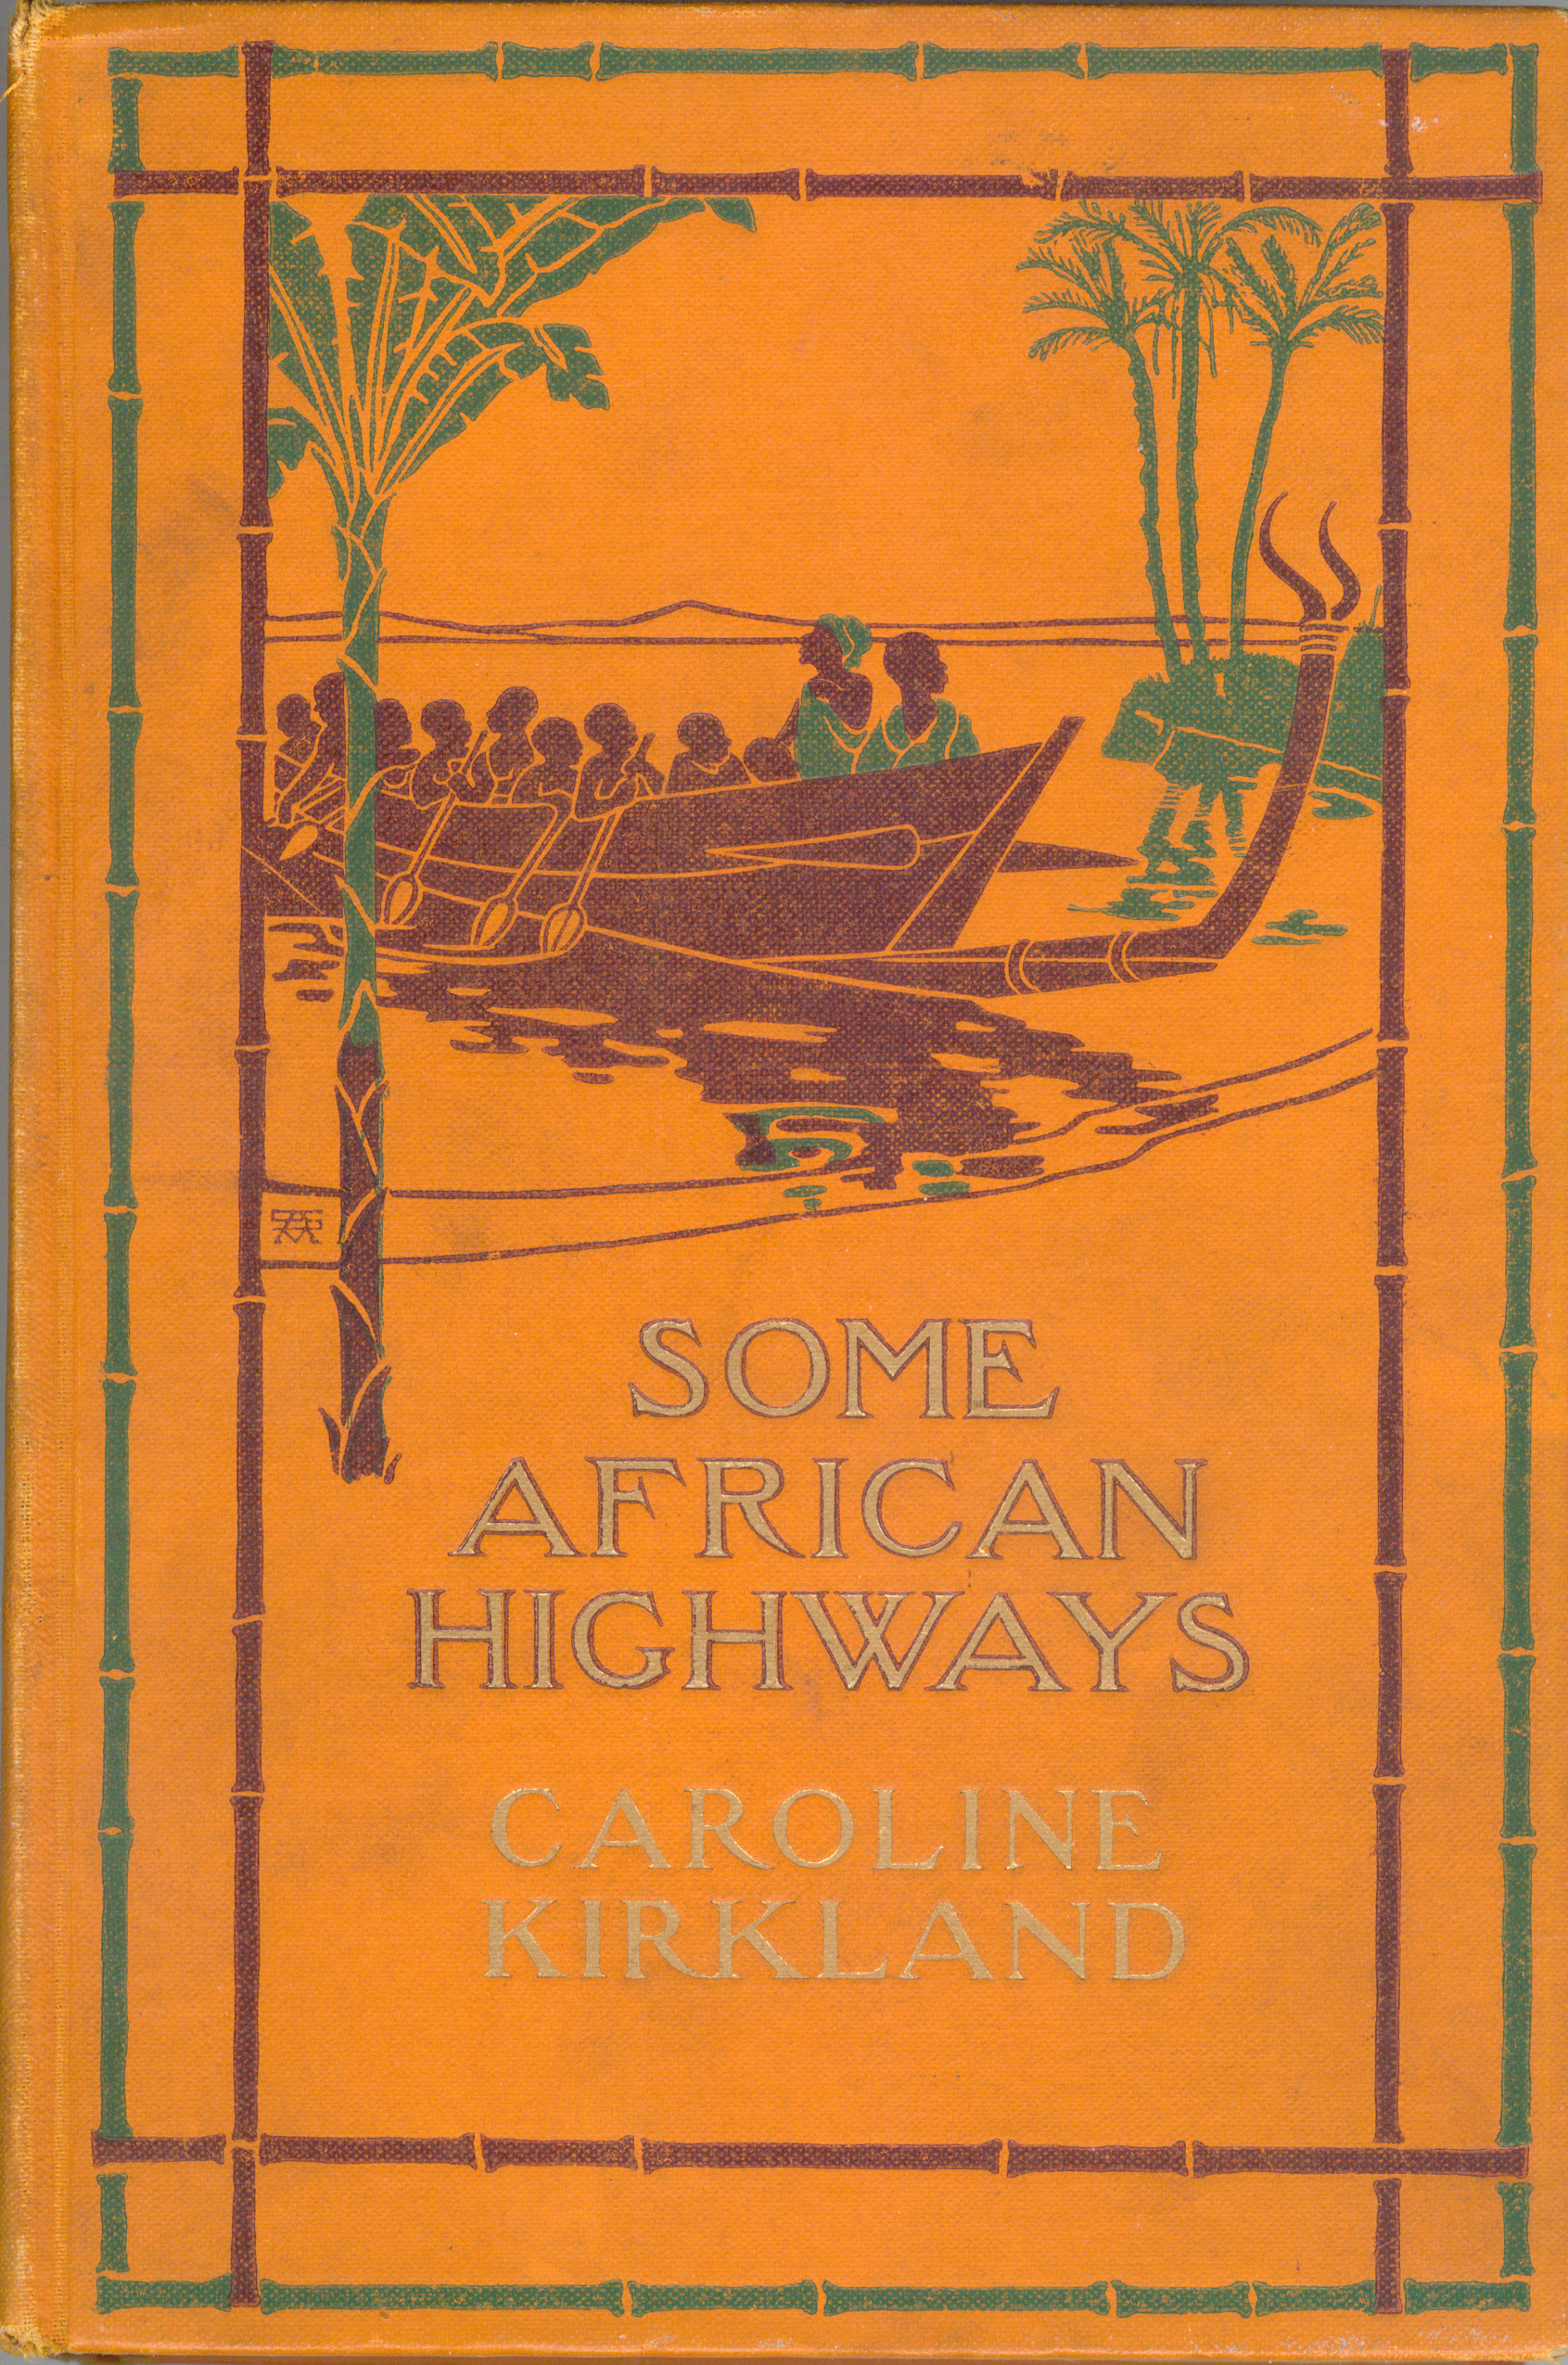 stylized image of people in boat with bamboo border; text: Some African Highways